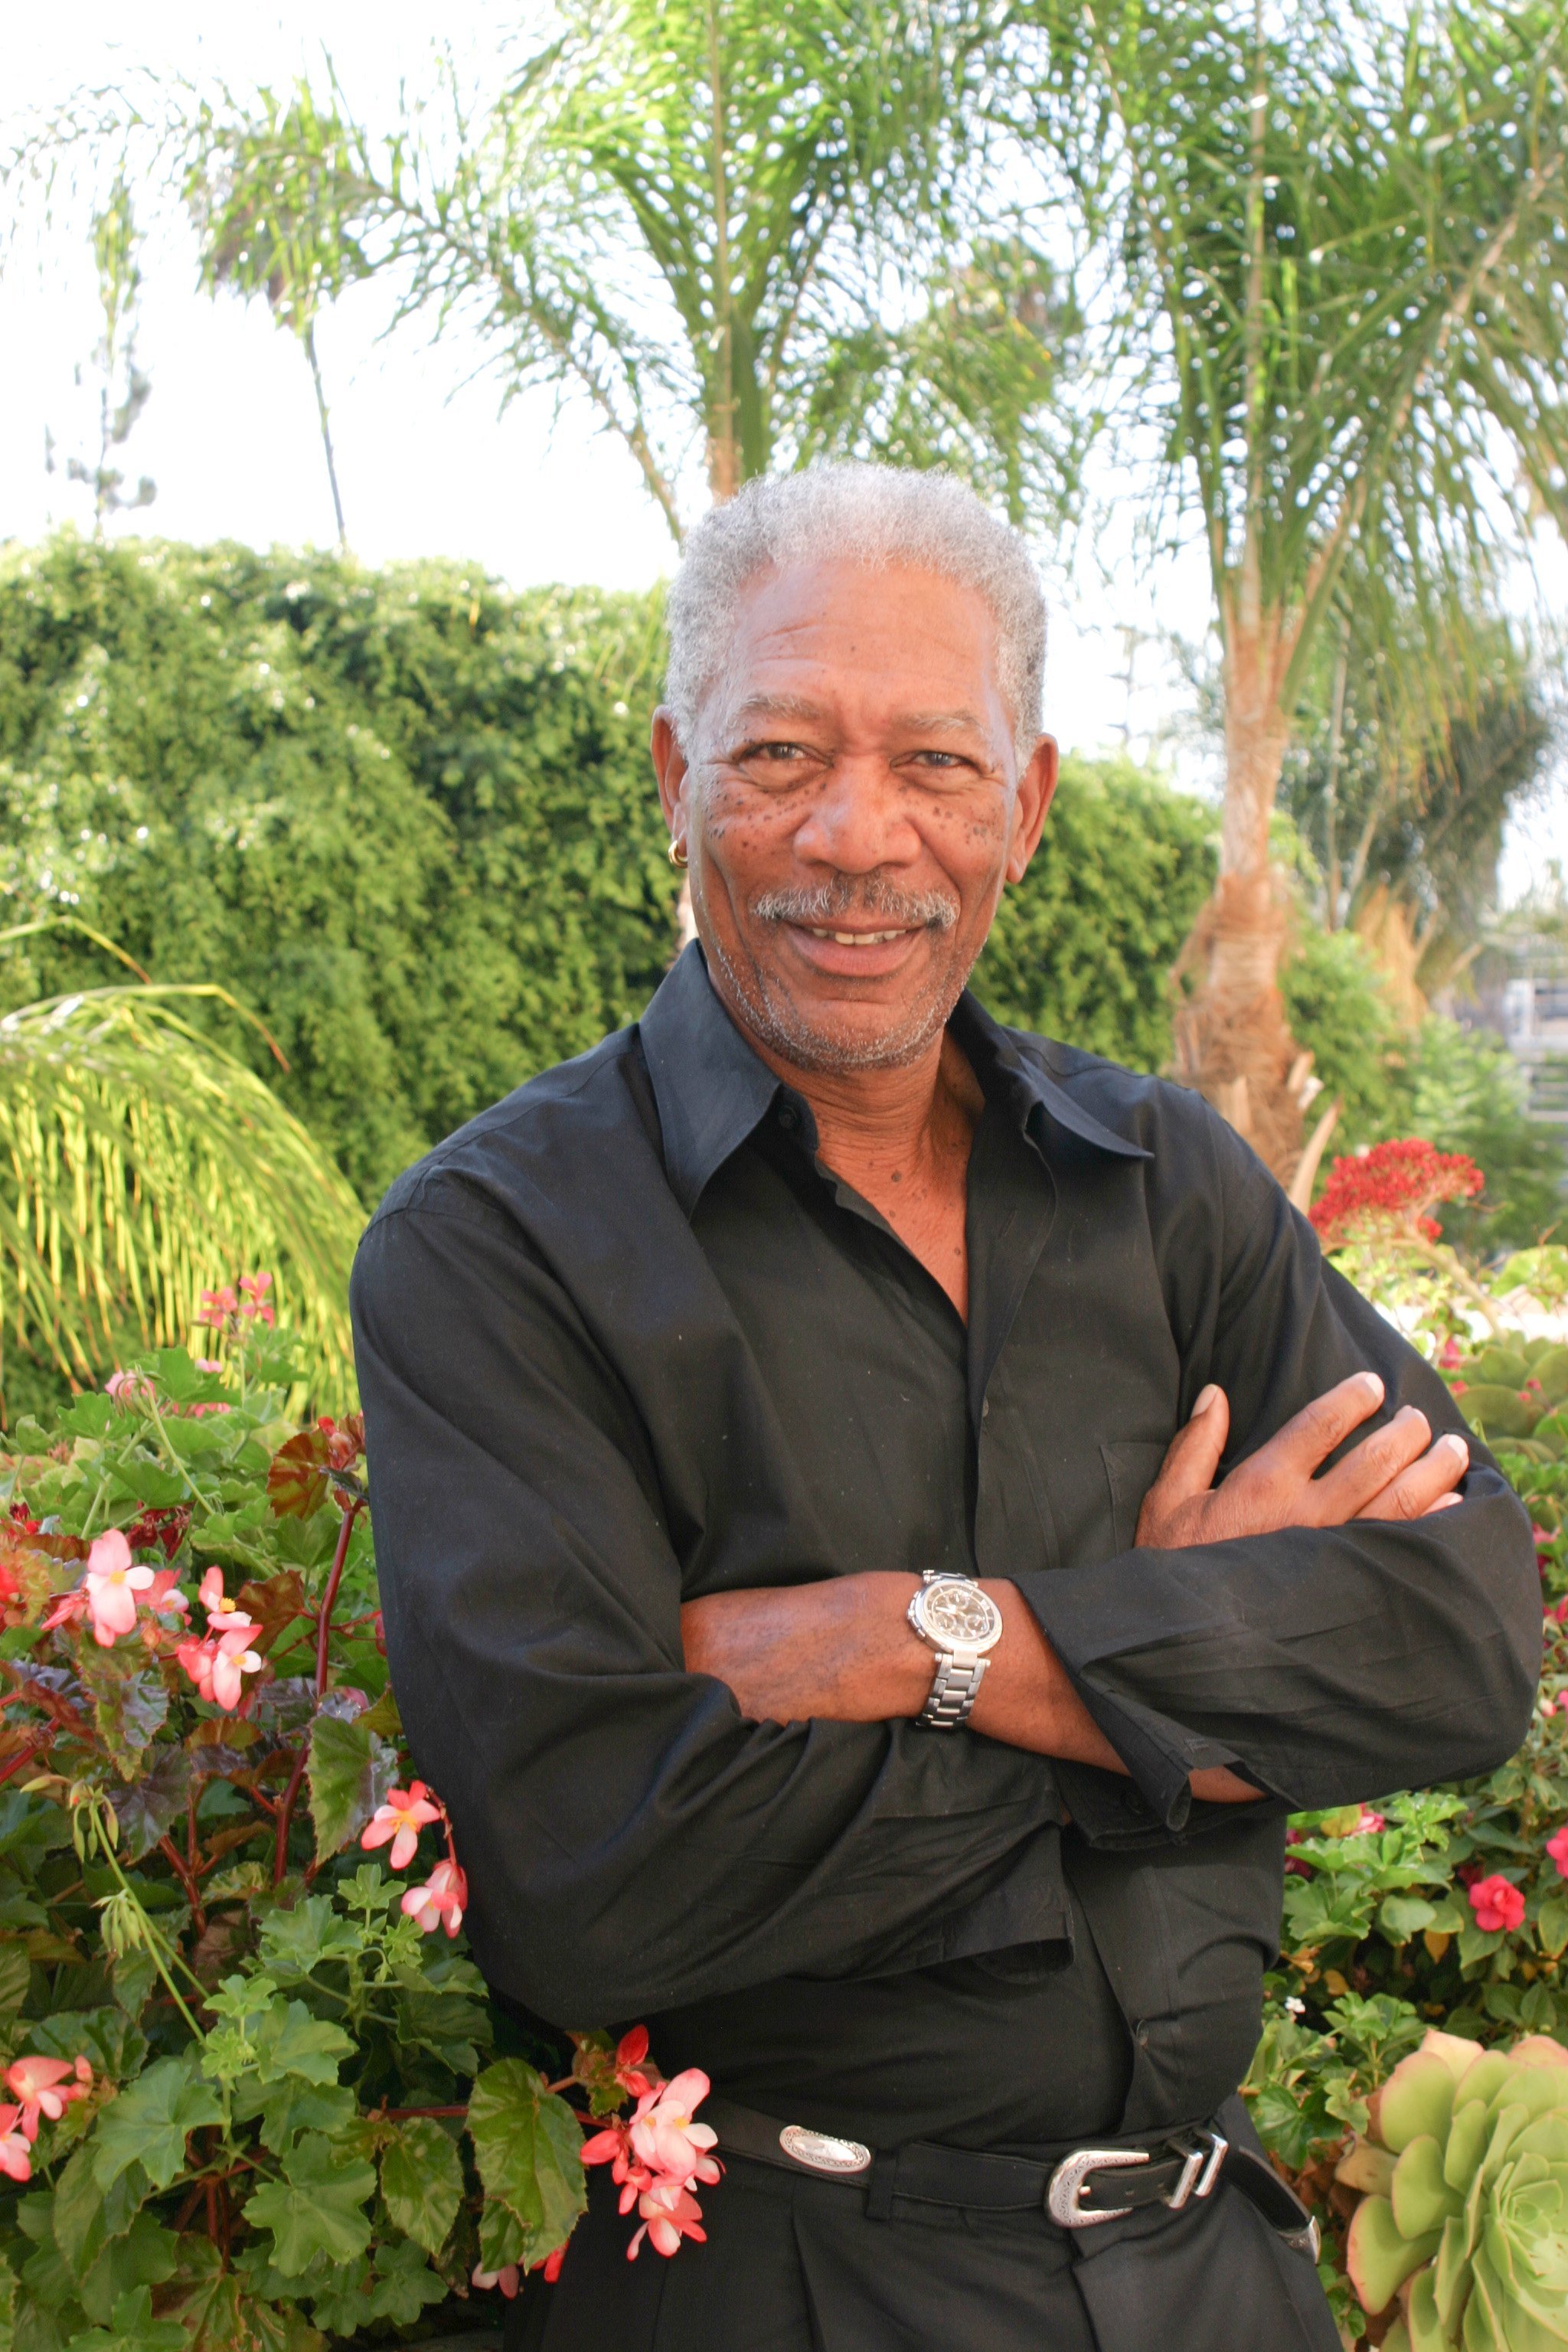 Morgan Freeman at the Four Seasons Hotel in Beverly Hills, California on August 21st, 2007. | Source: Getty Images.